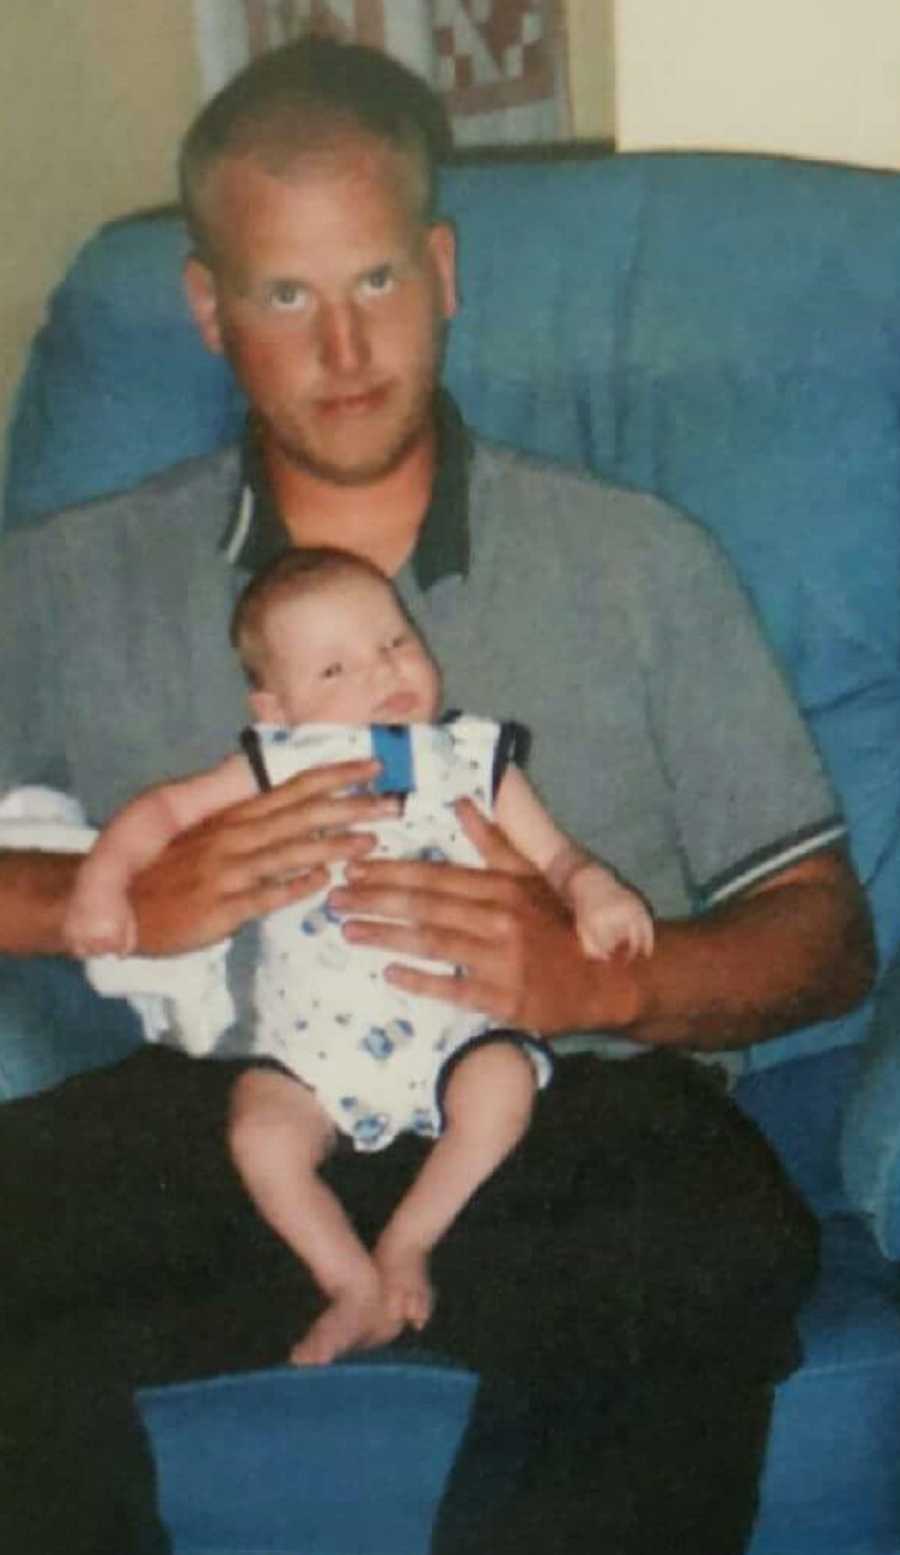 Man who was taken from parents as child sits in chair holding his newborn son